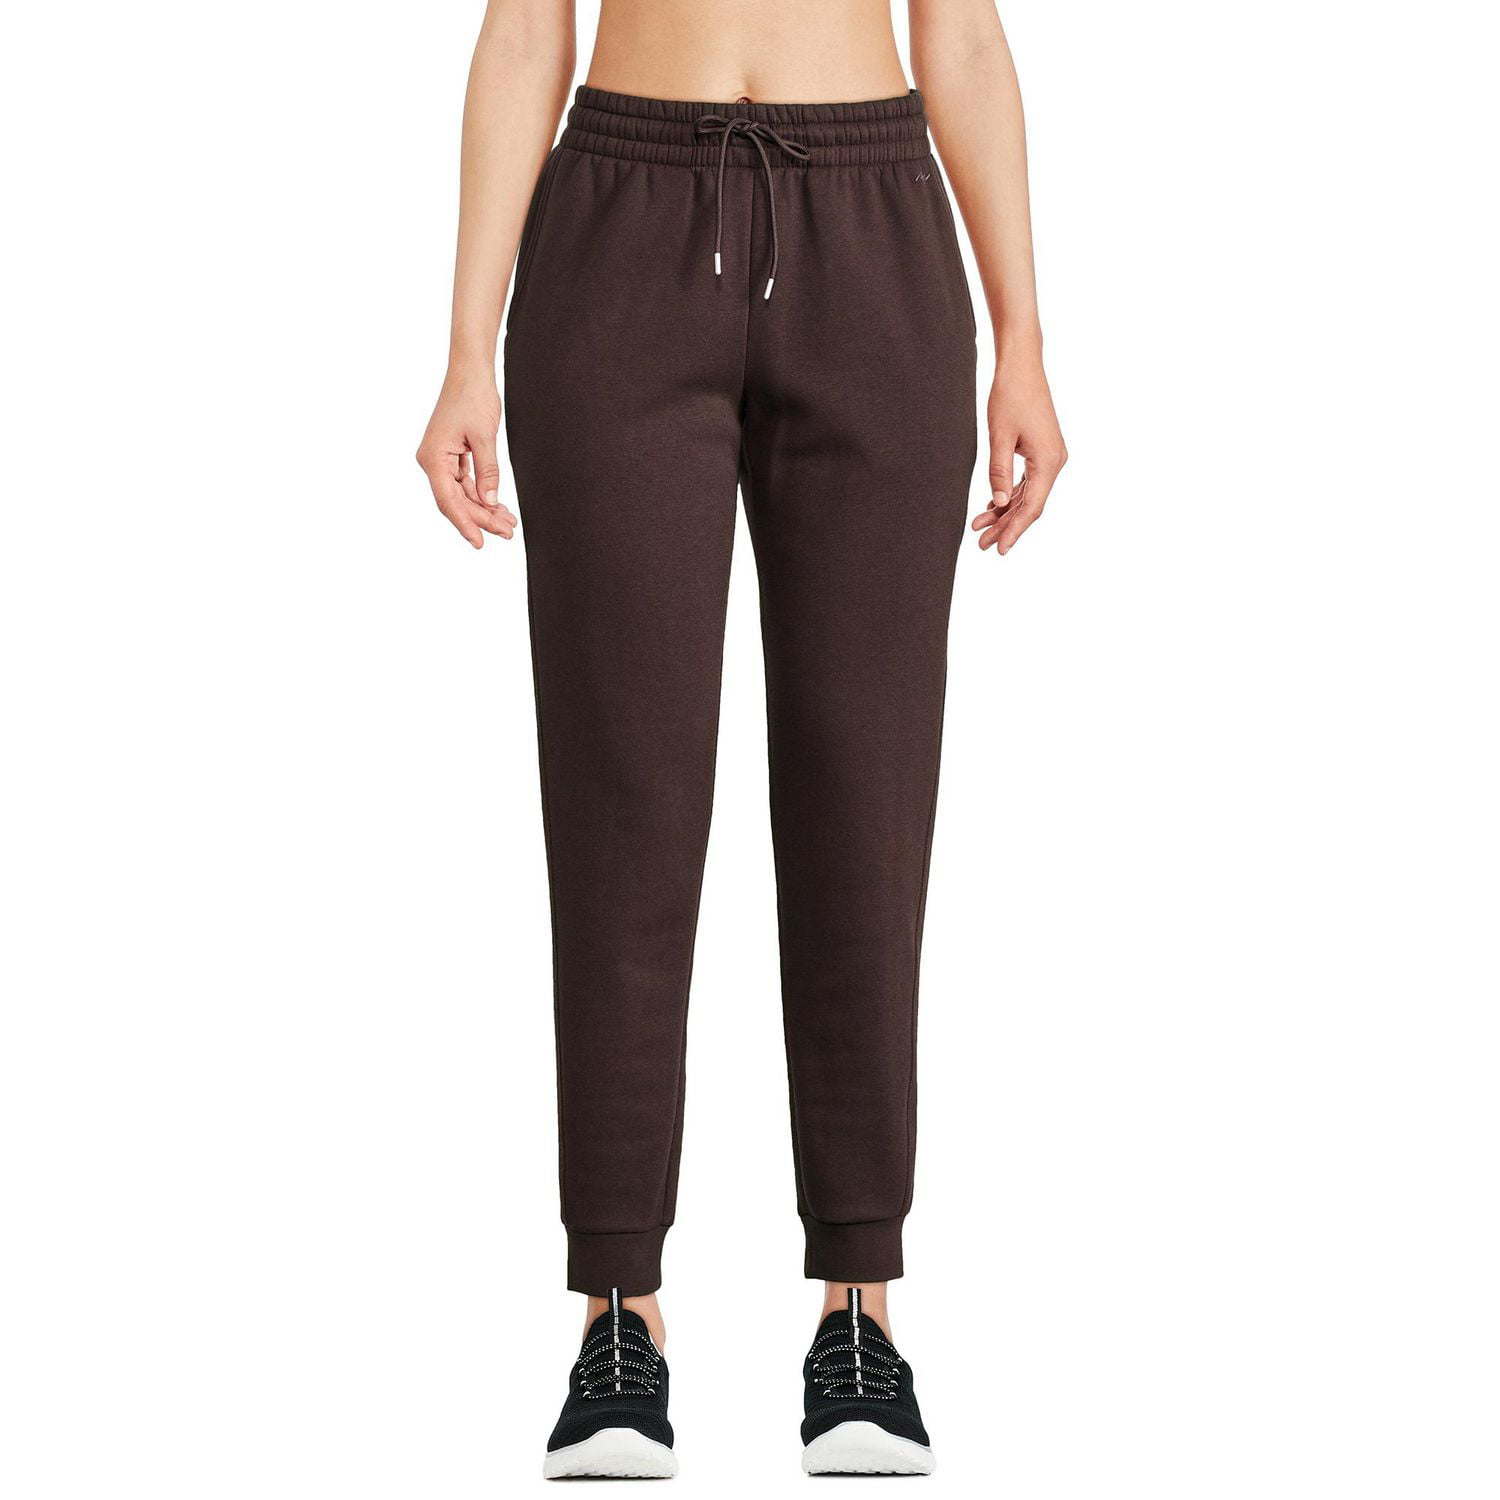 Athletic Works Women's Jogger 